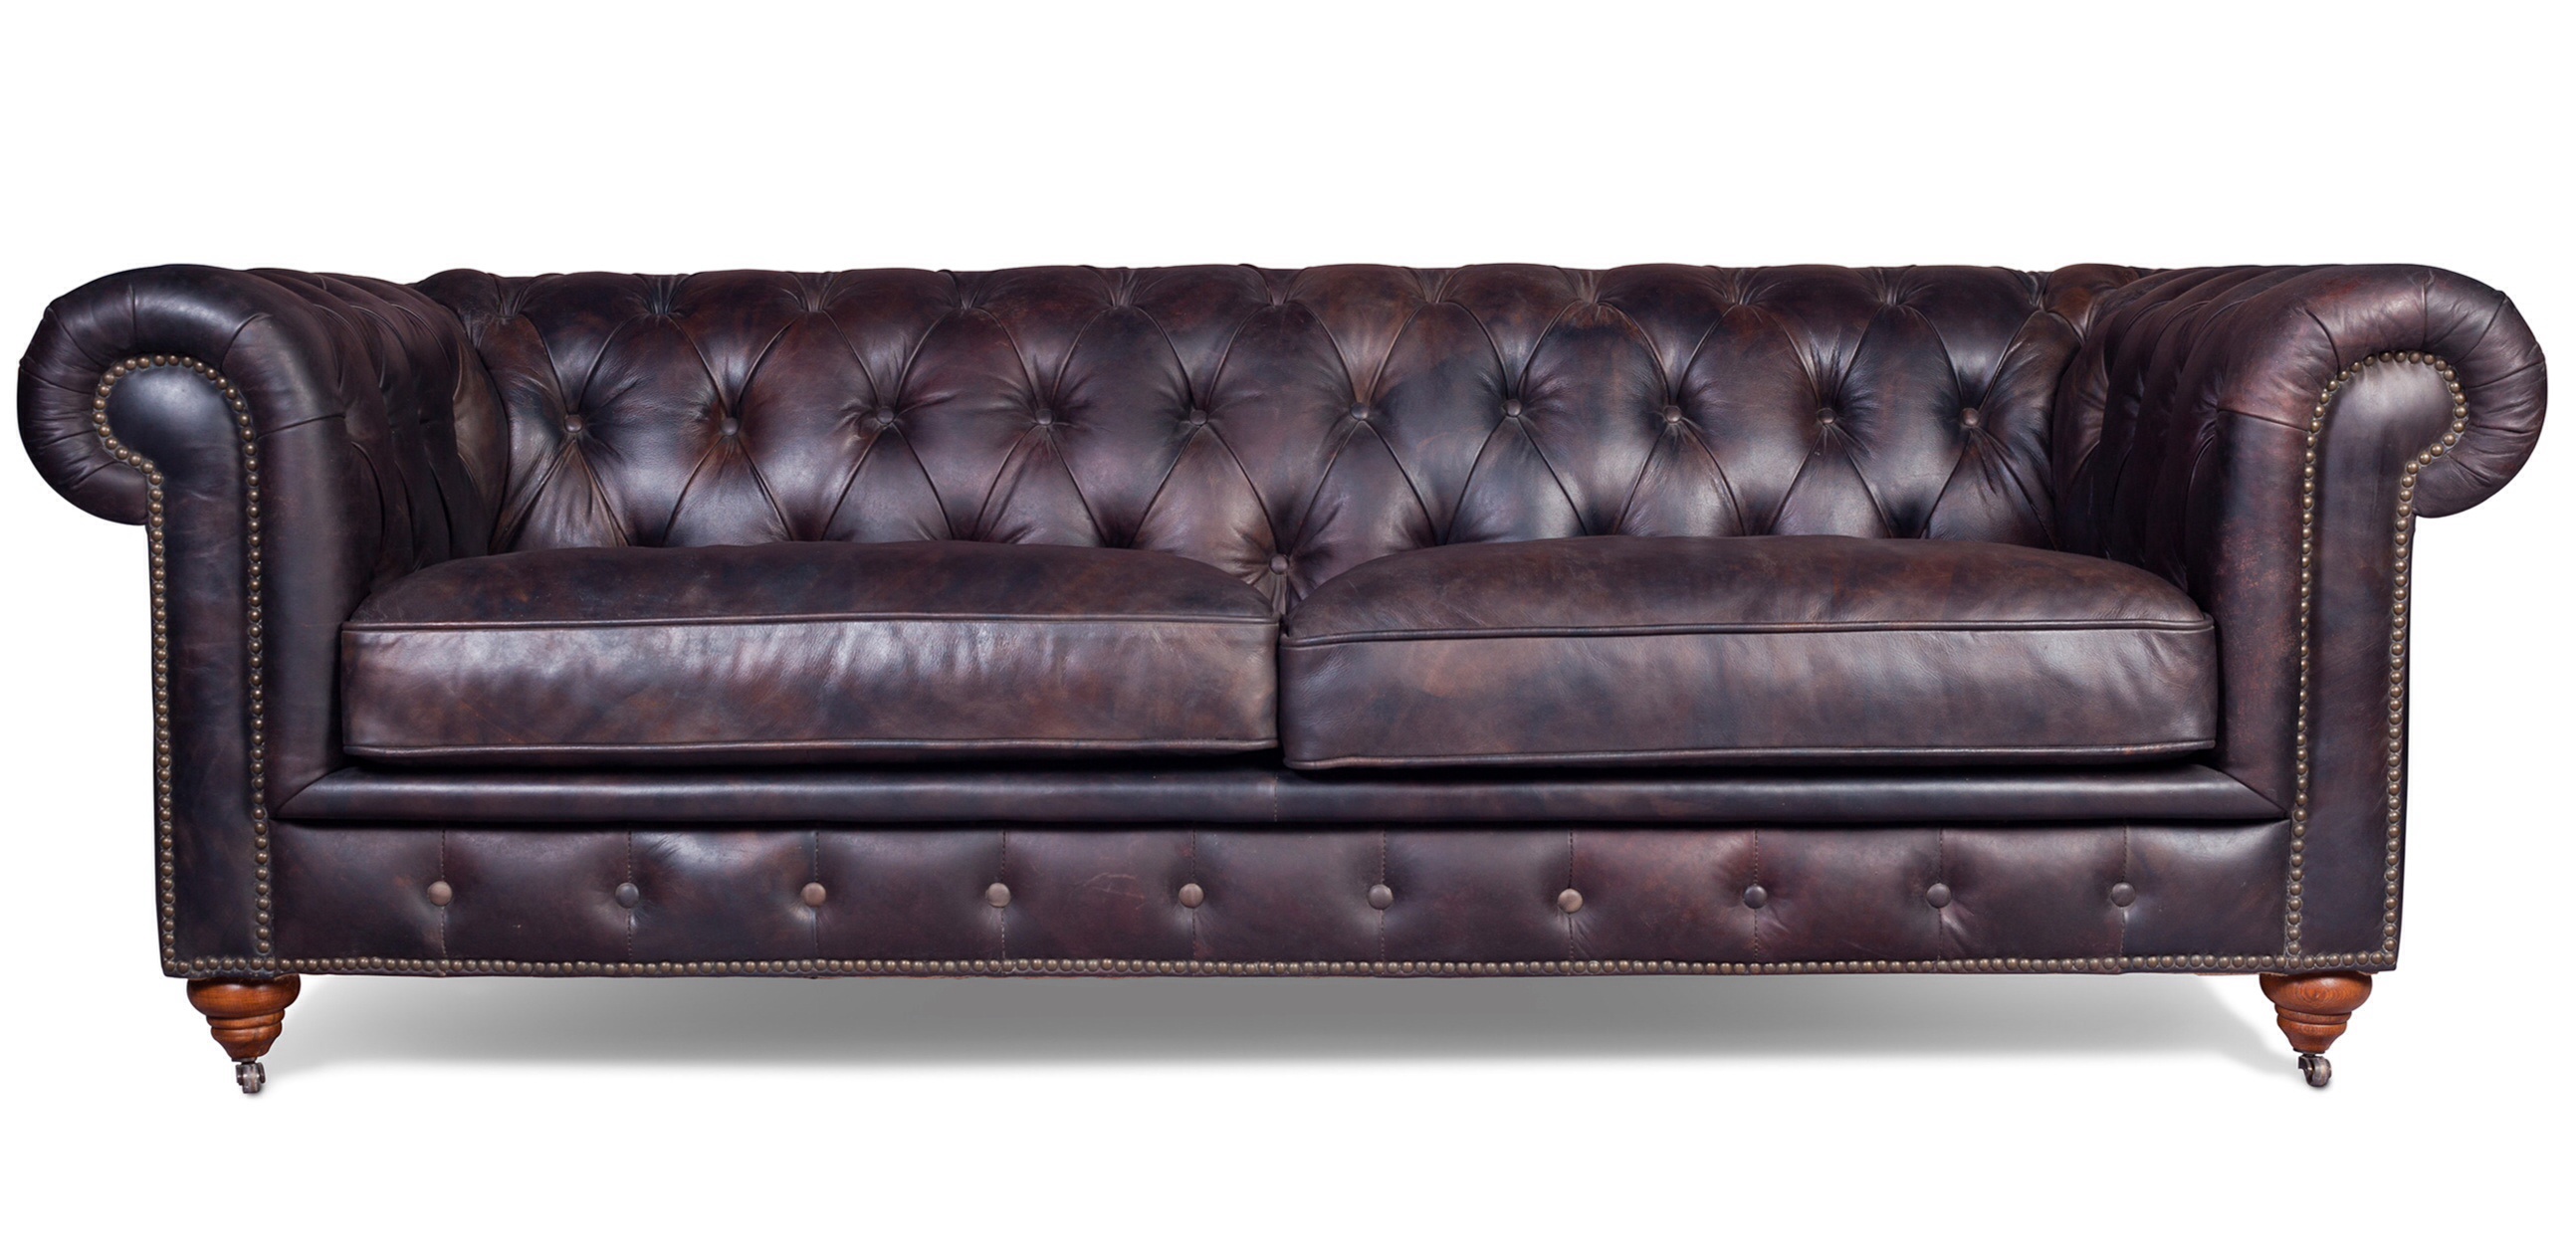 Chesterfield 2 seat sofa with quilted vintage  brown premium leather